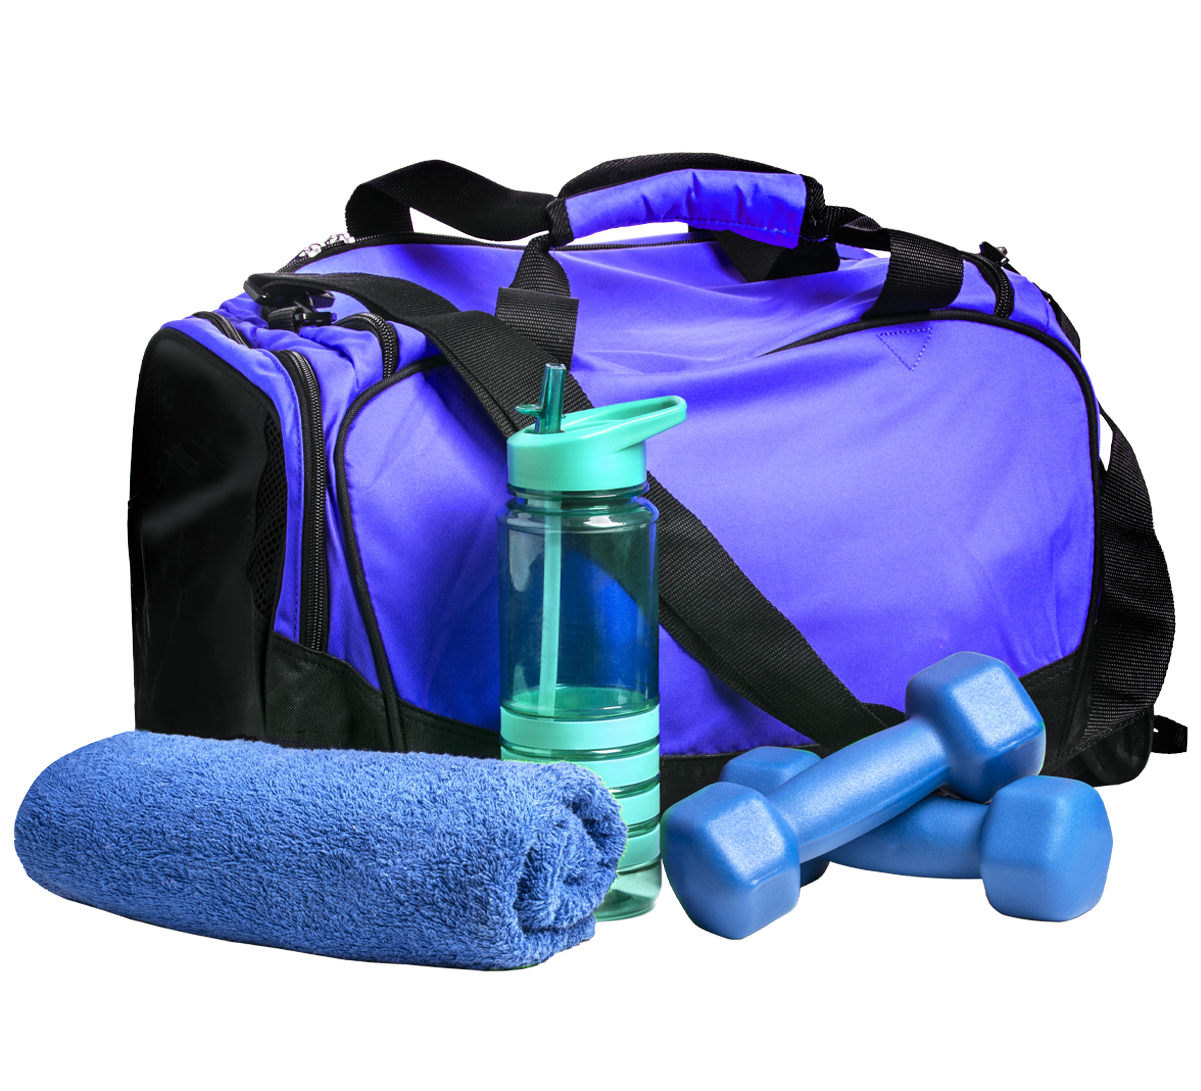 Blue gym bag with a water bottle, towel and hand weights